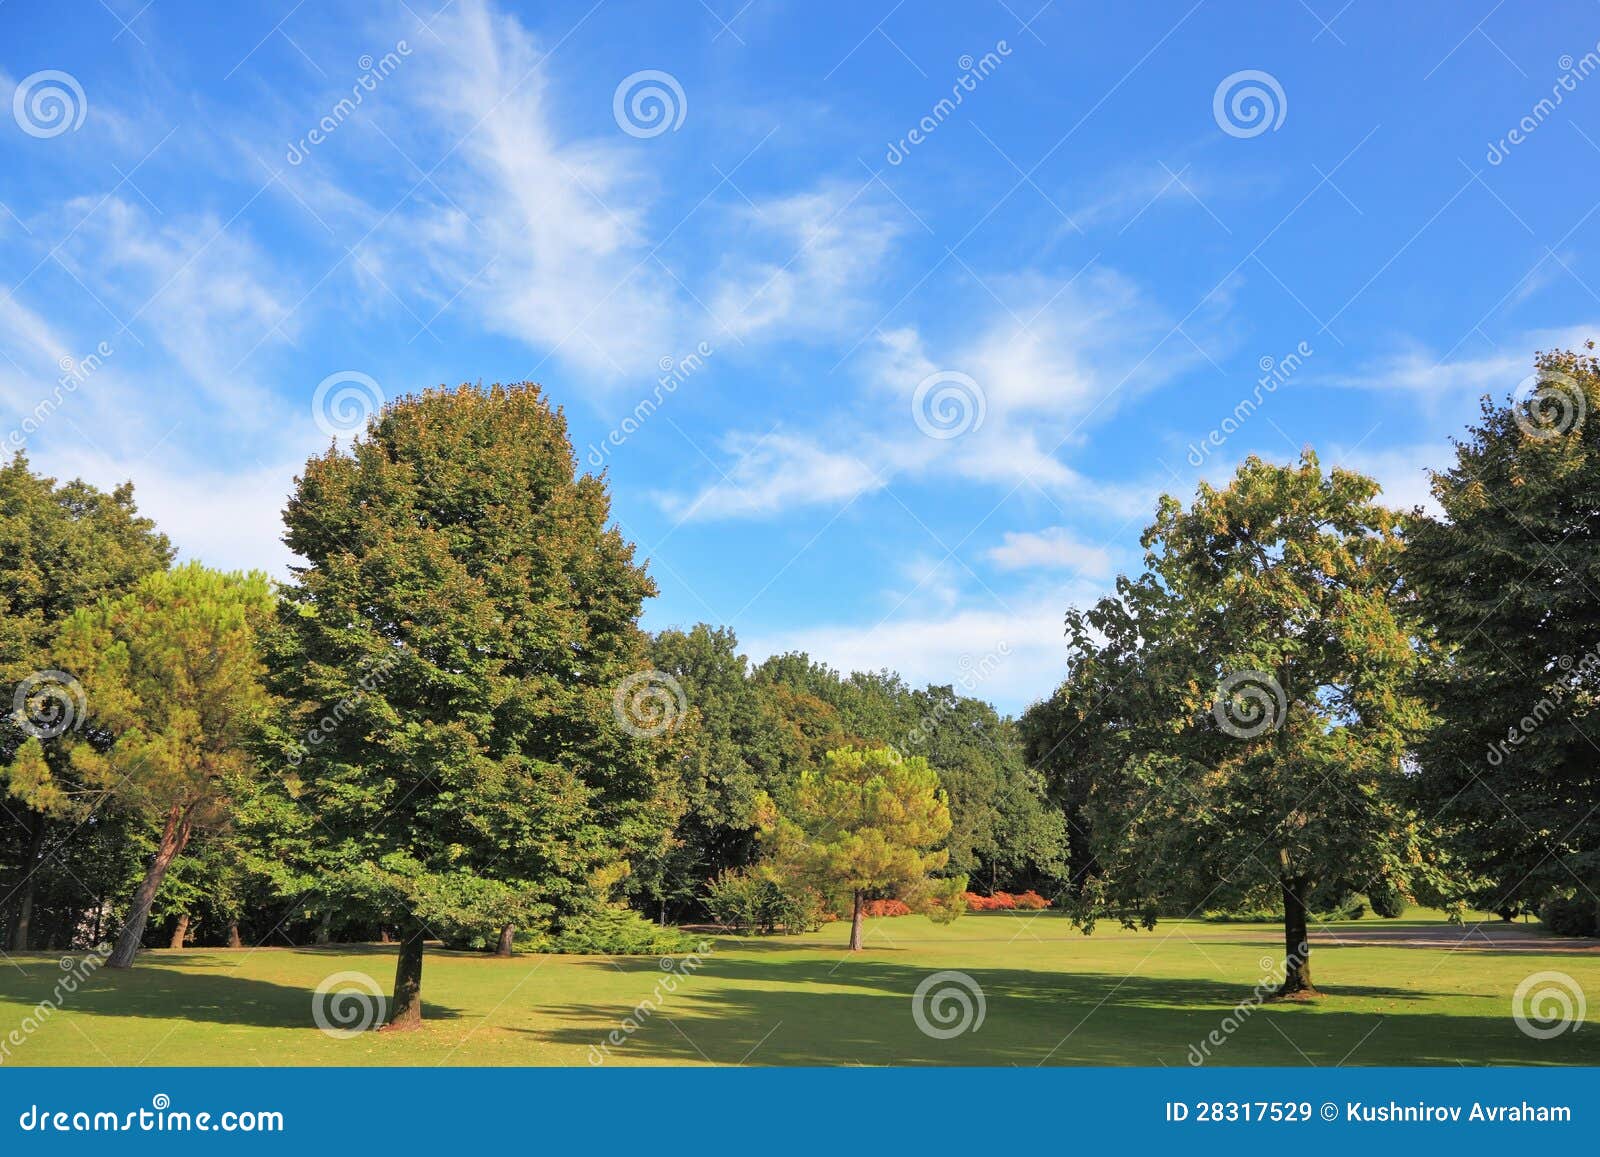 The Grassy Lawn is Surrounded with Coniferous Trees Stock Image - Image ...